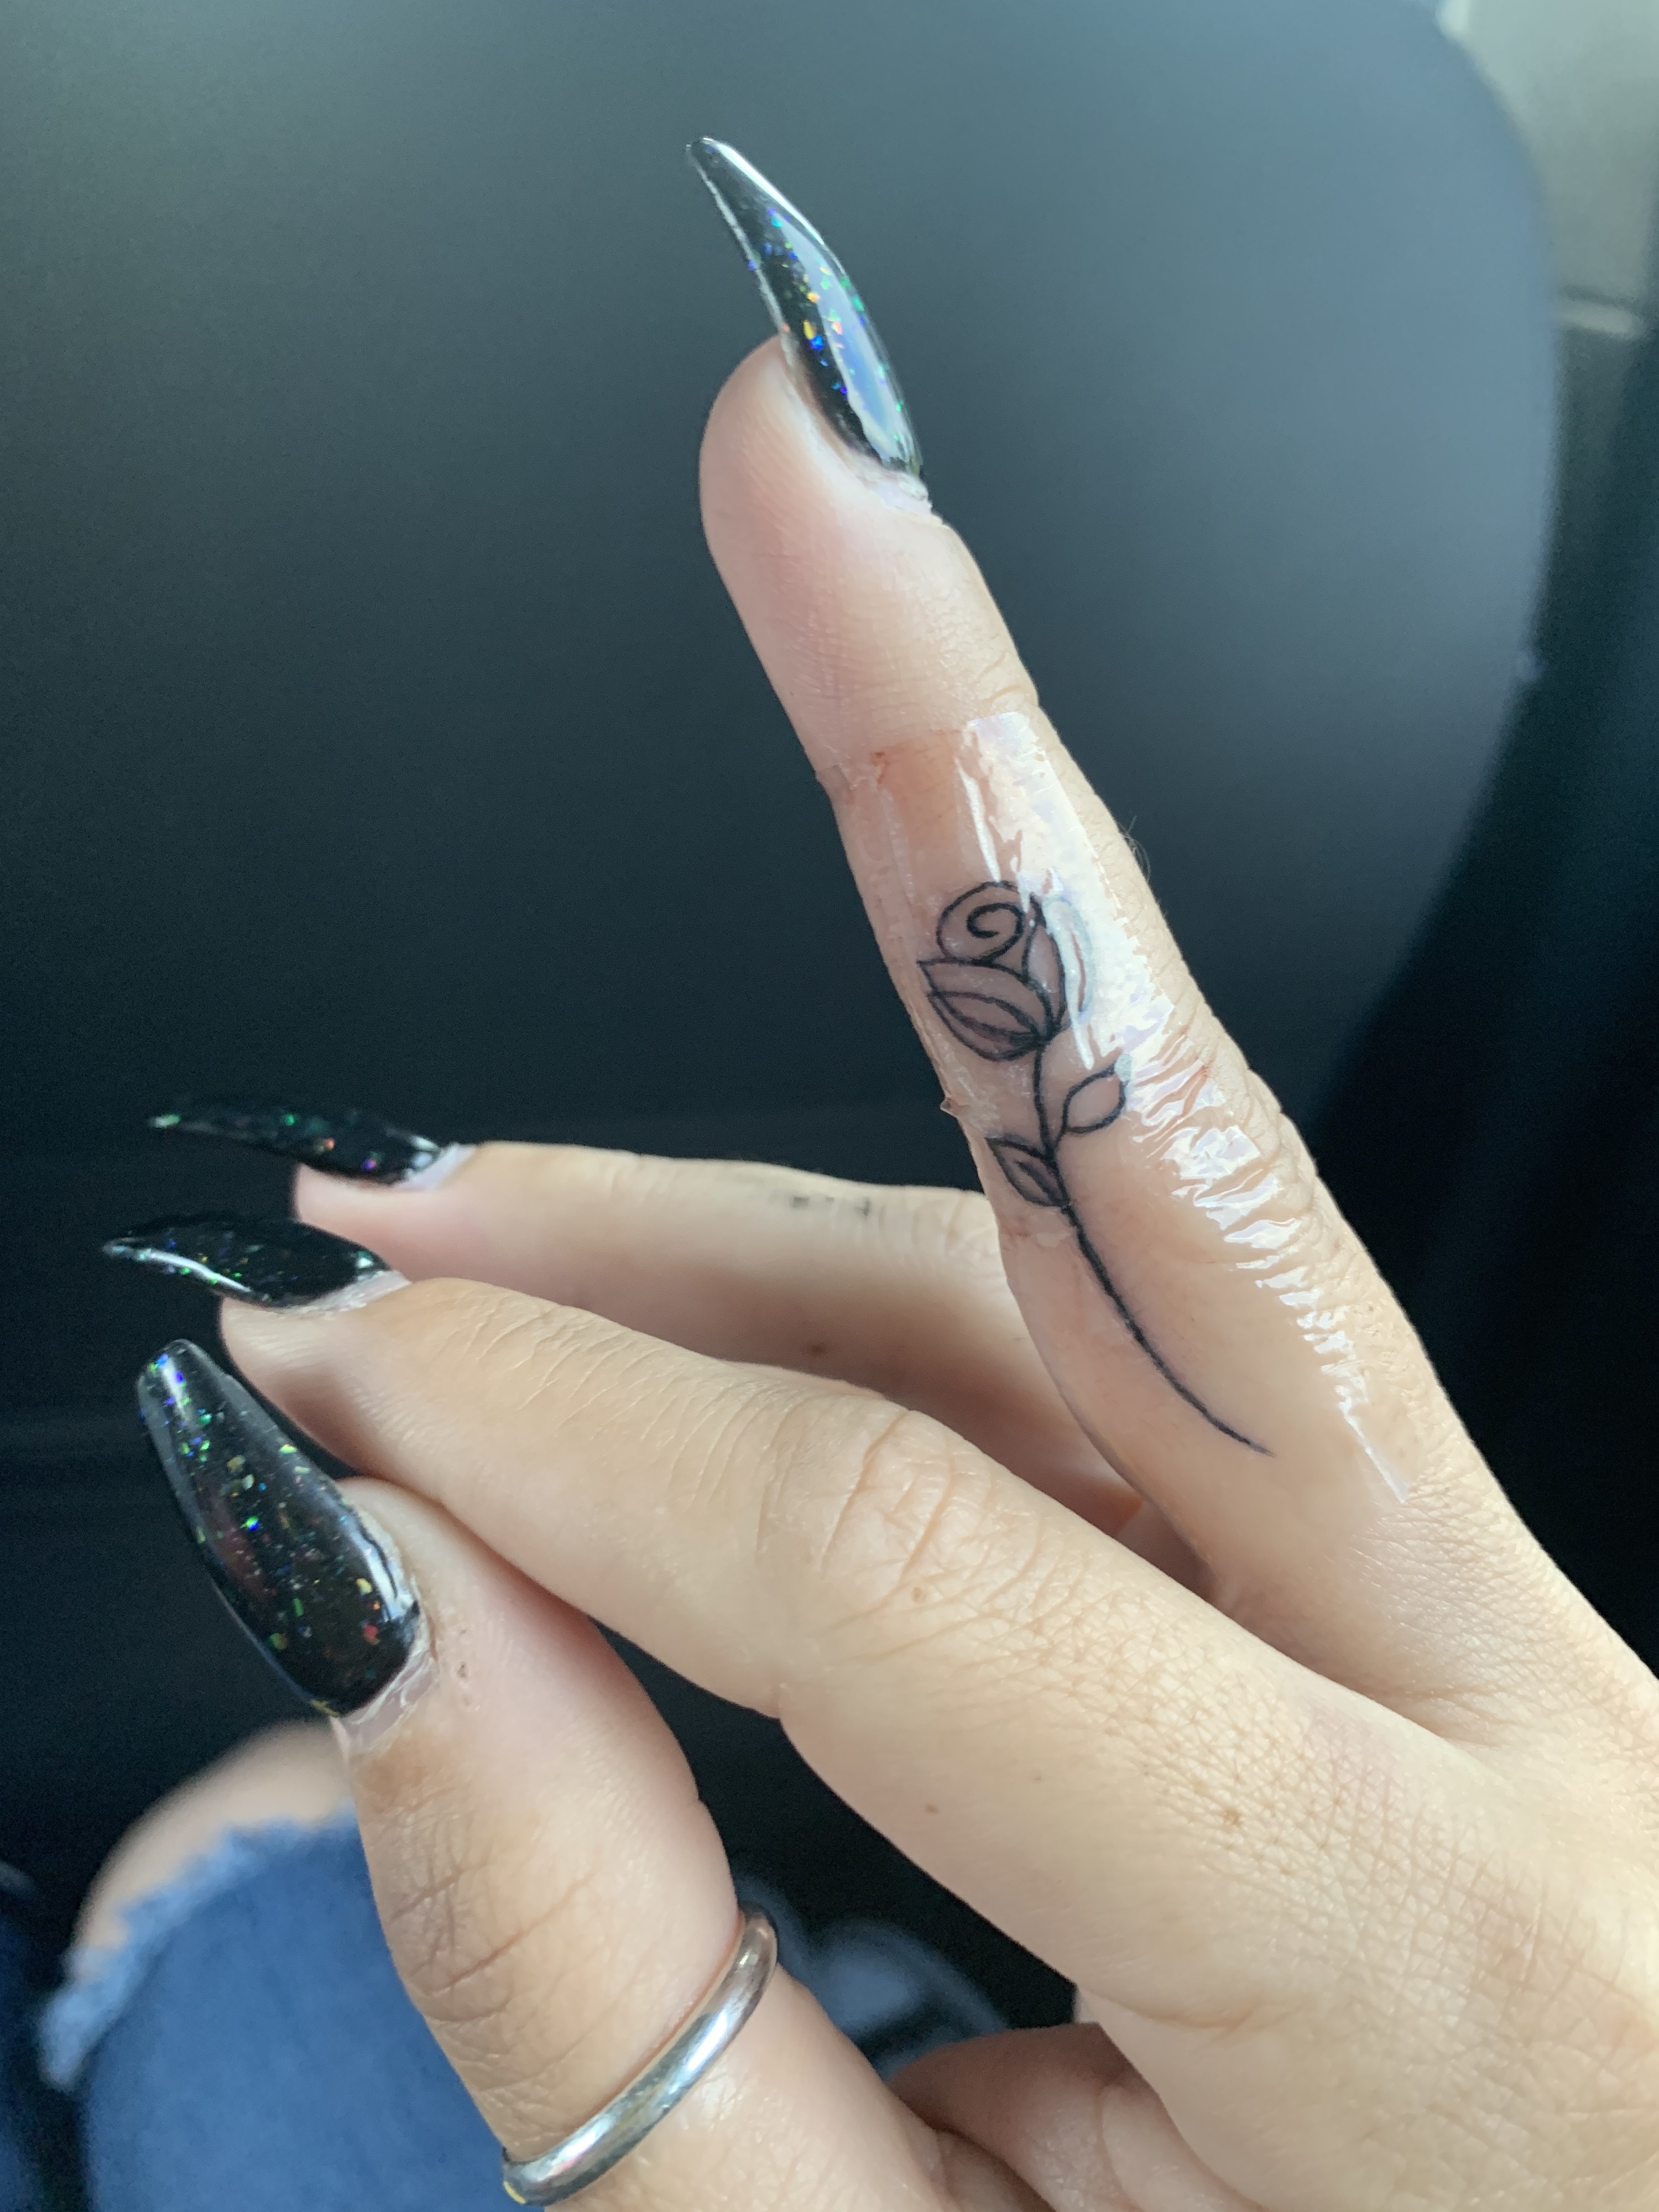 Best Small and Cute Tattoo Designs for Fingers Ring and Index   Vanitynoapologies  Indian Makeup and Beauty Blog